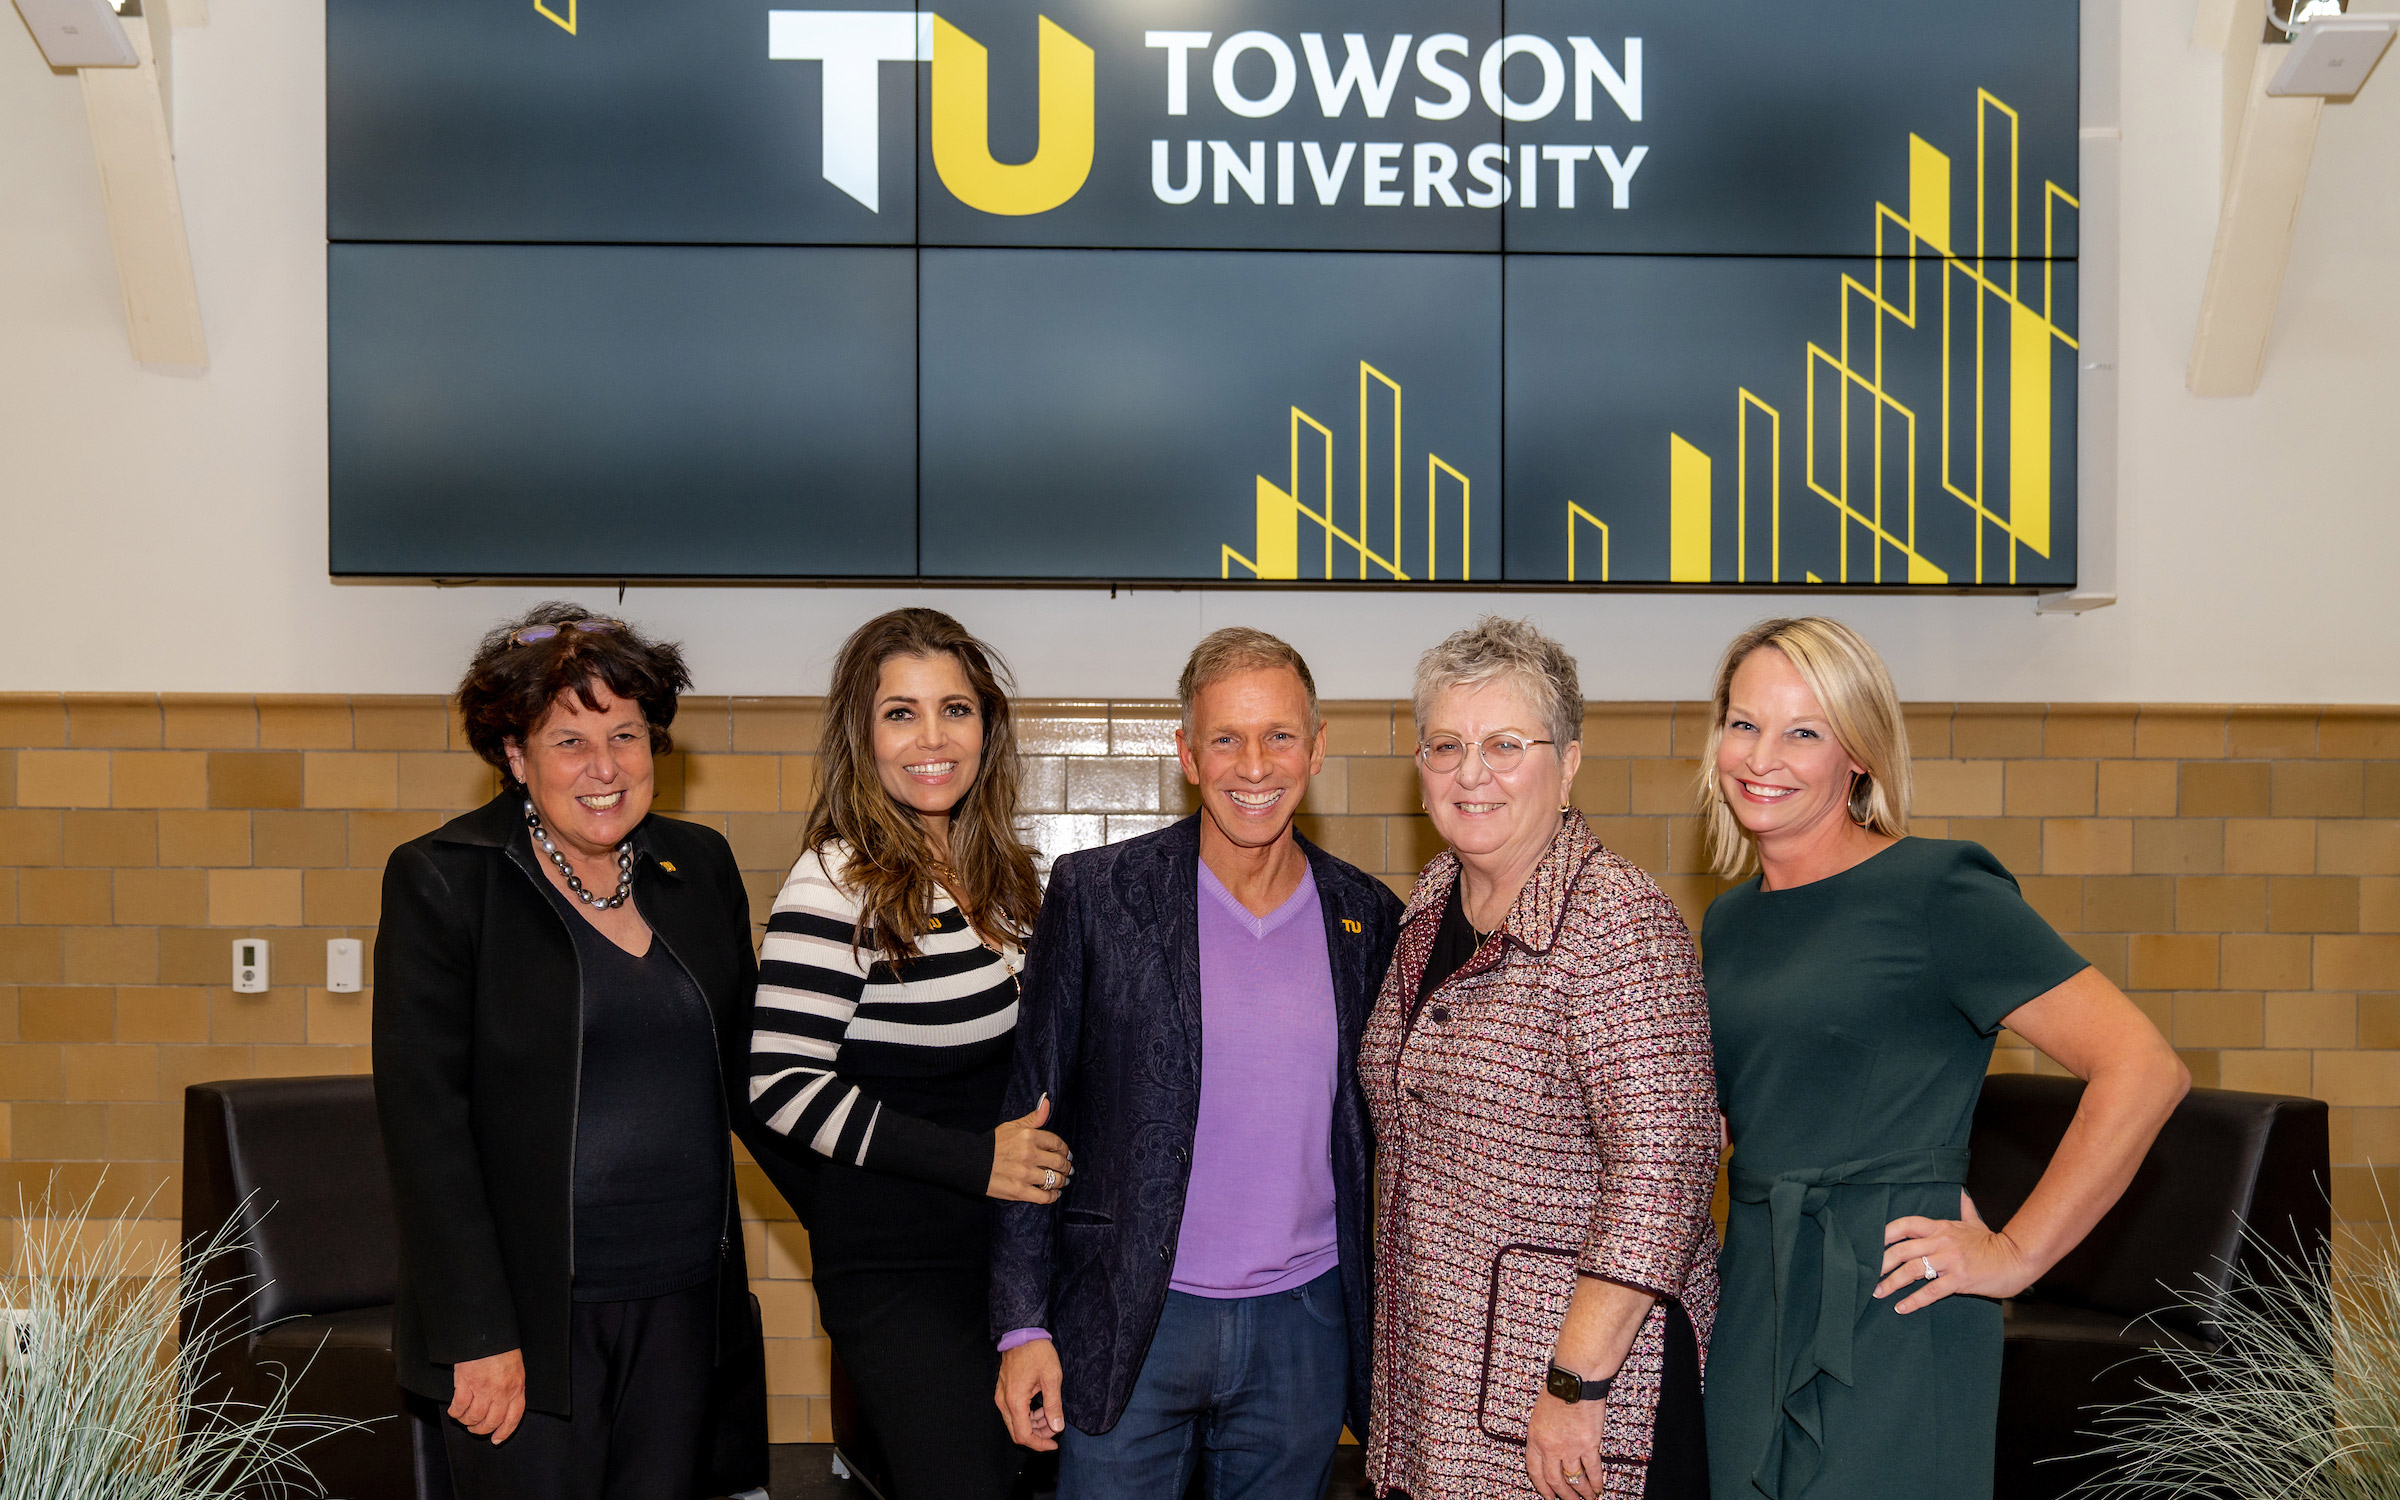 Group stands in front of digital screen with TU logo